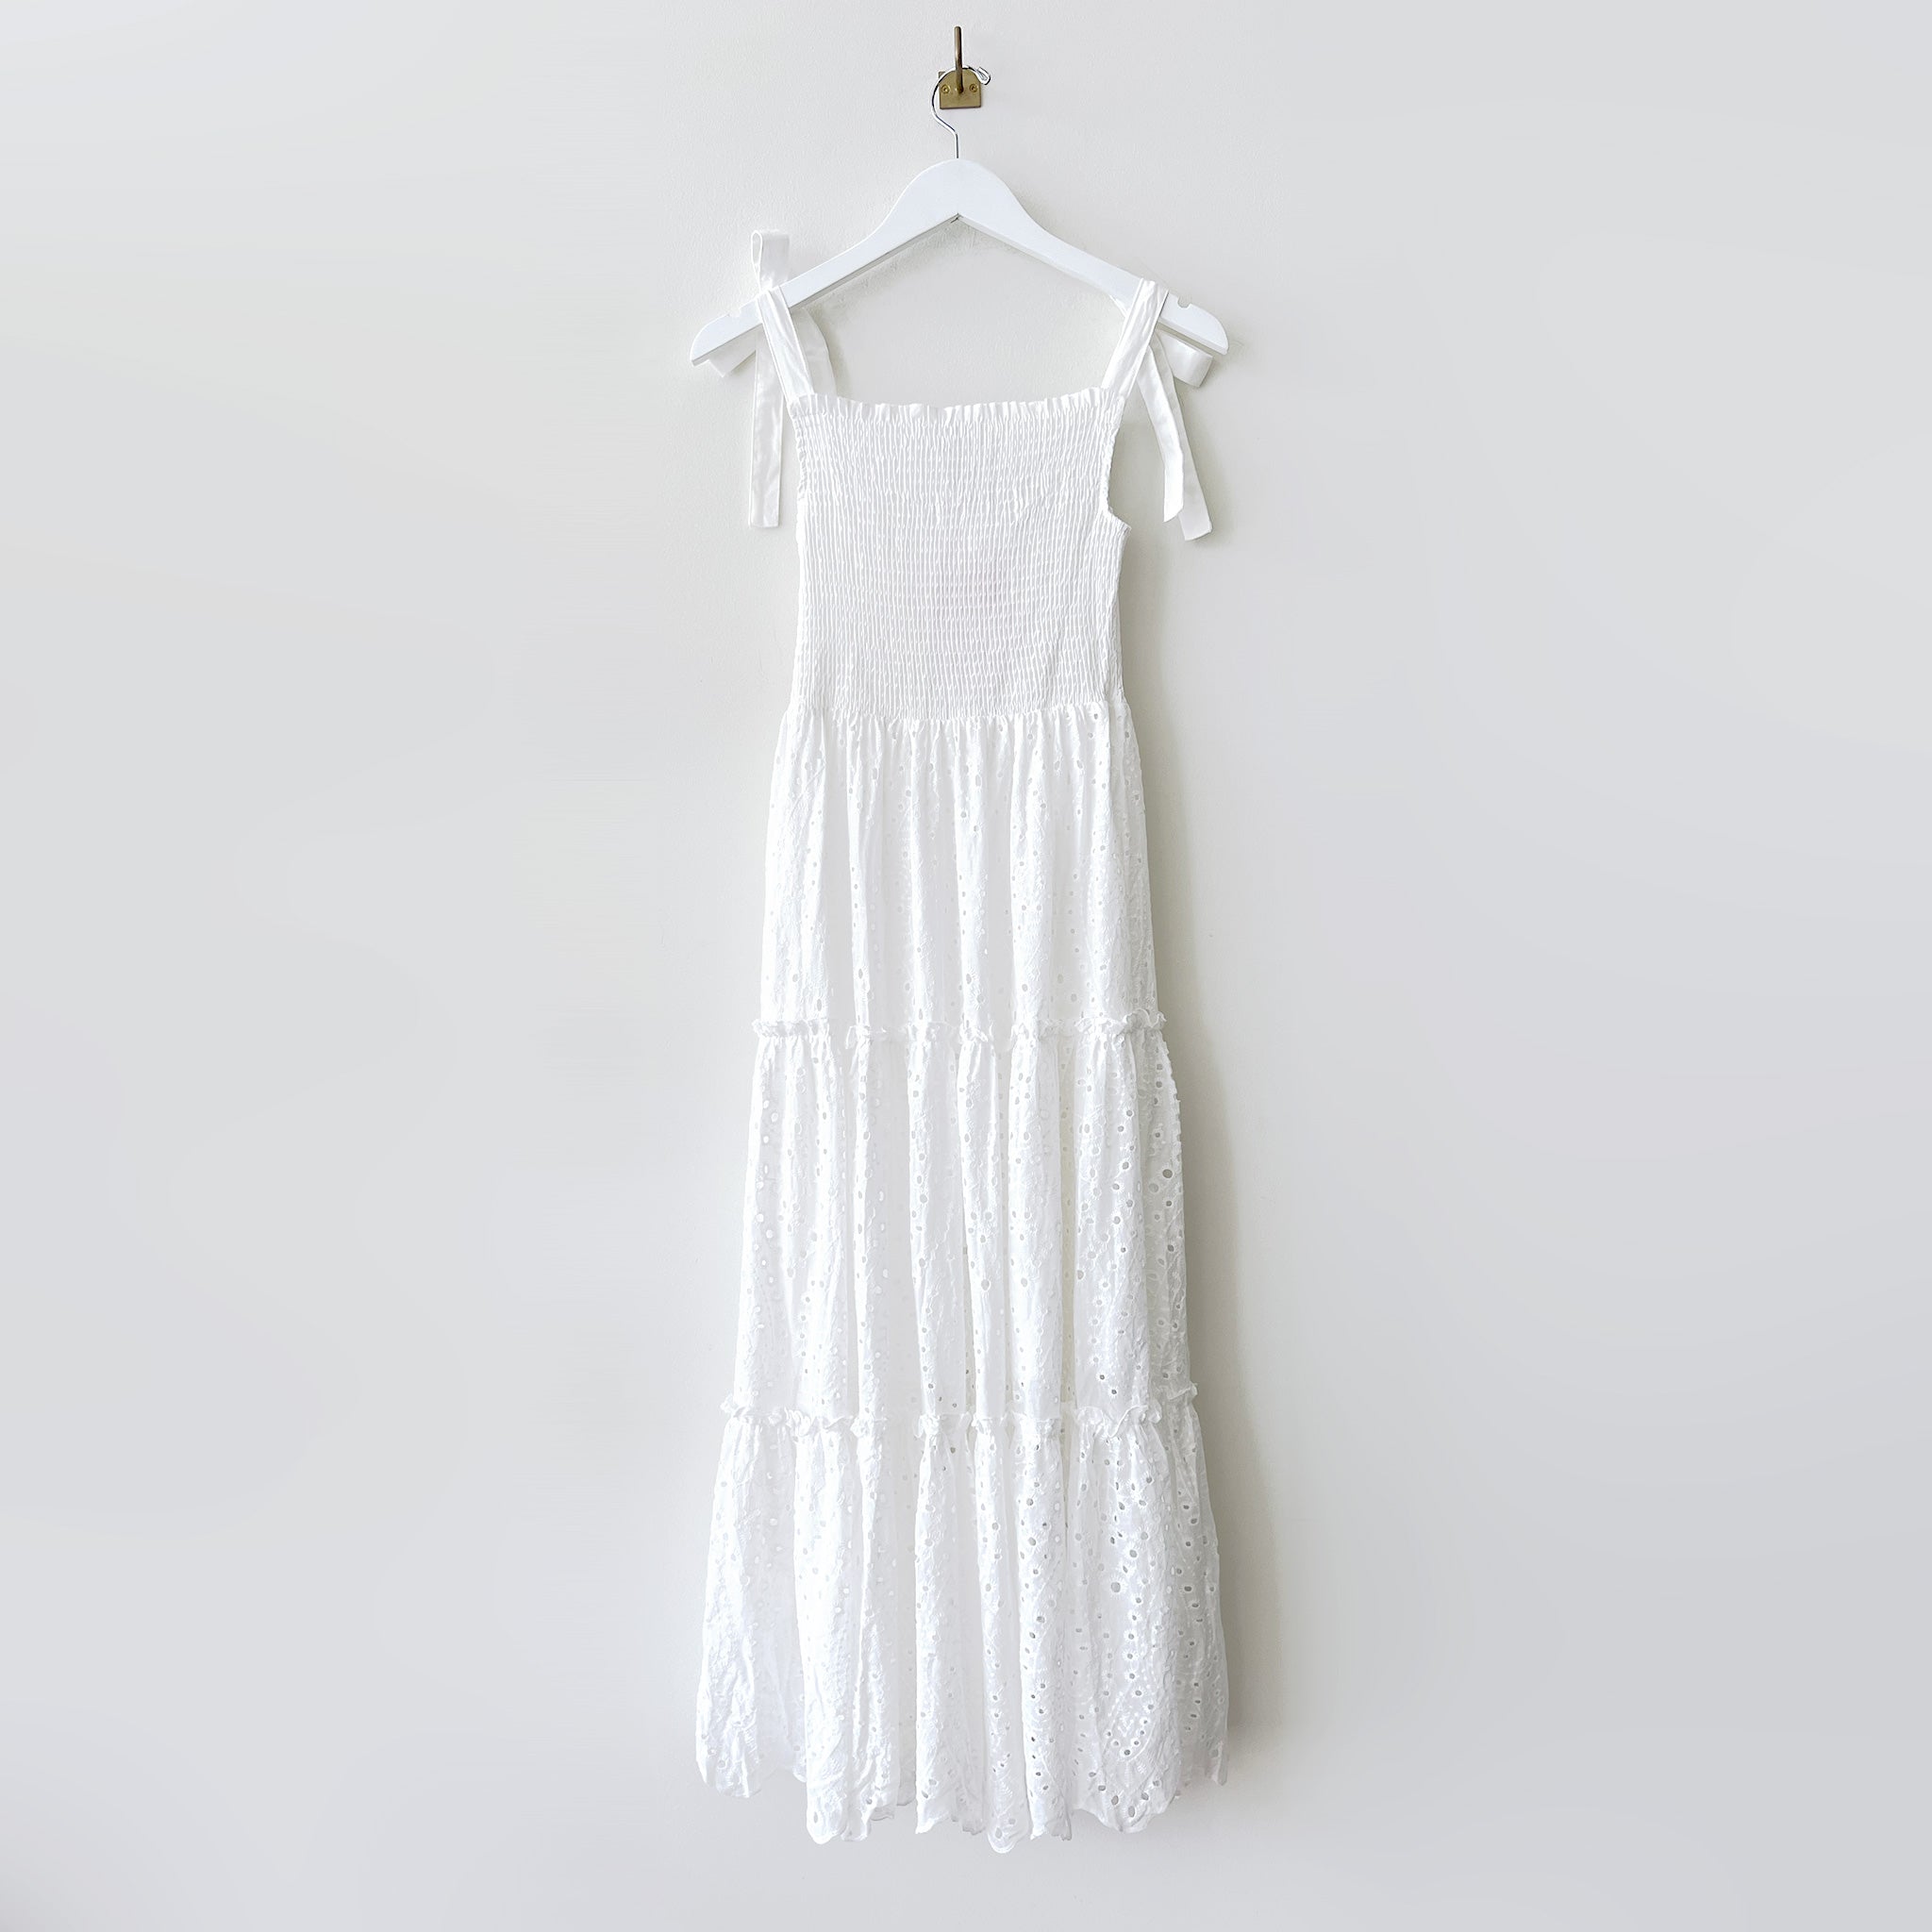 Long white dress with ruched bodice, ribbon tied shoulder straps and tiered eyelet skirt - front view.